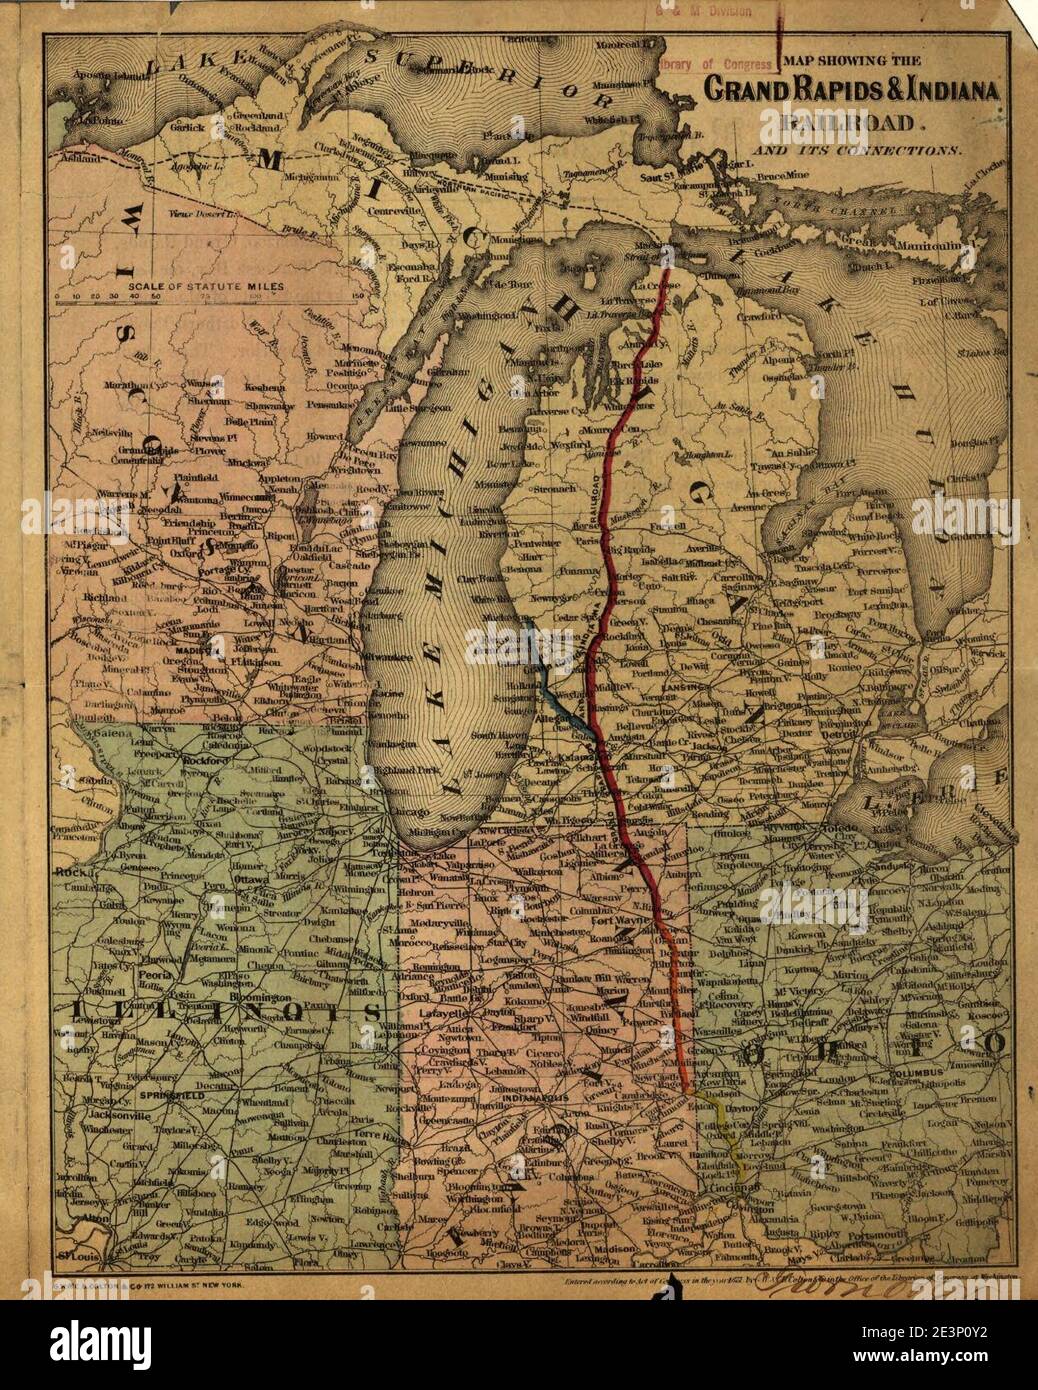 Map showing the Grand Rapids & Indiana Railroad, and its connections. Stock Photo